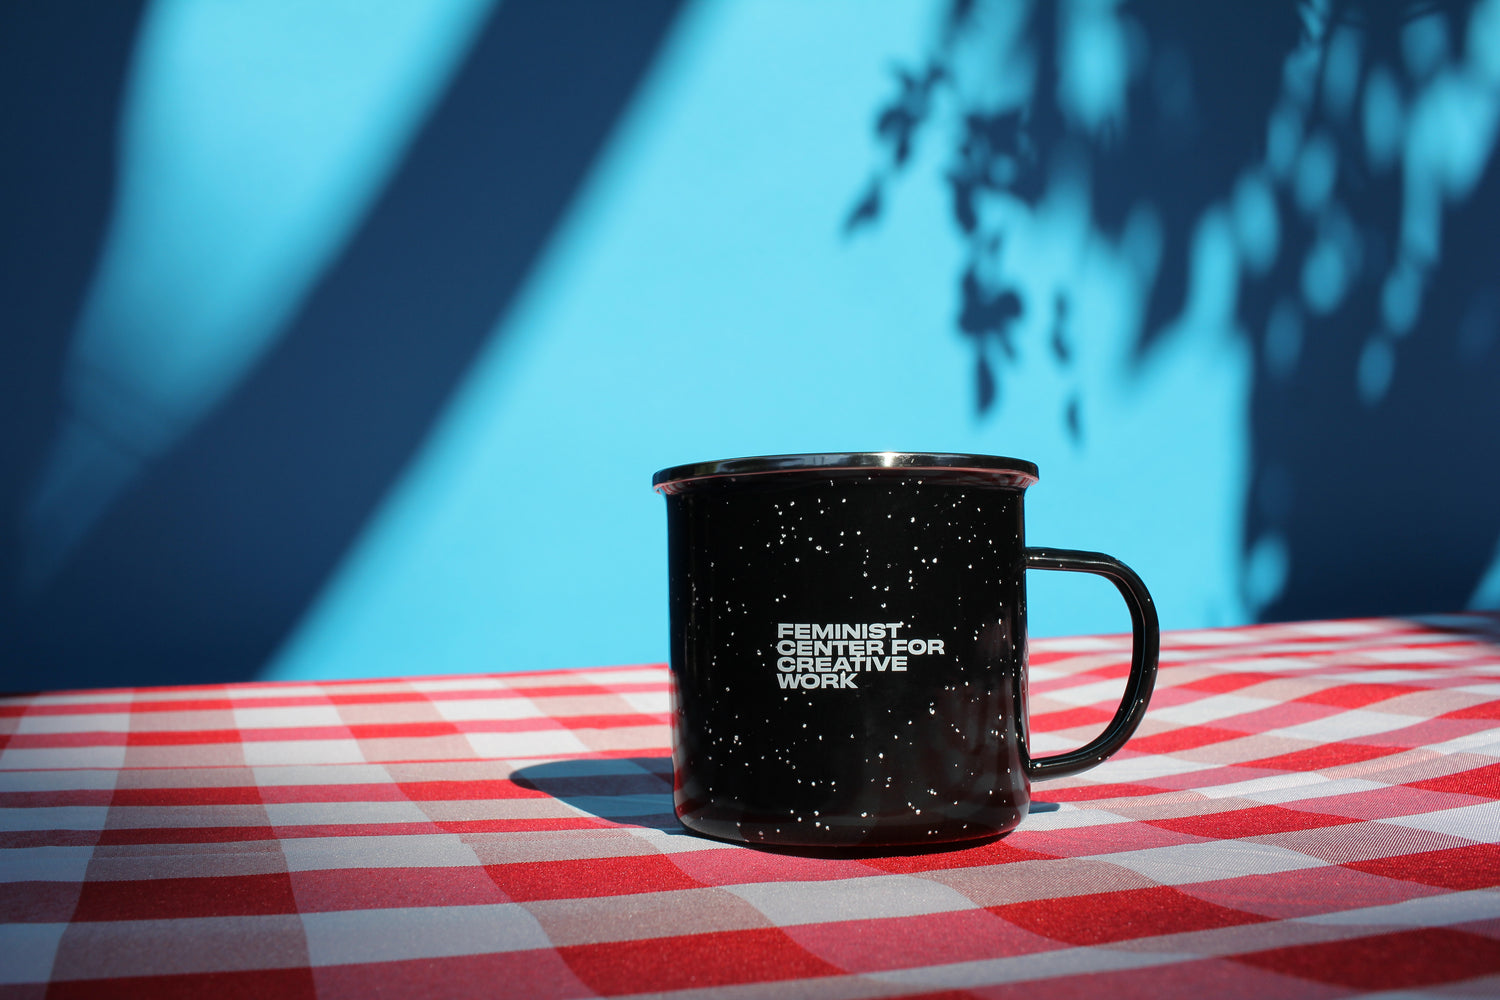 Black FCCW enameled mug with speckles on a tablecloth